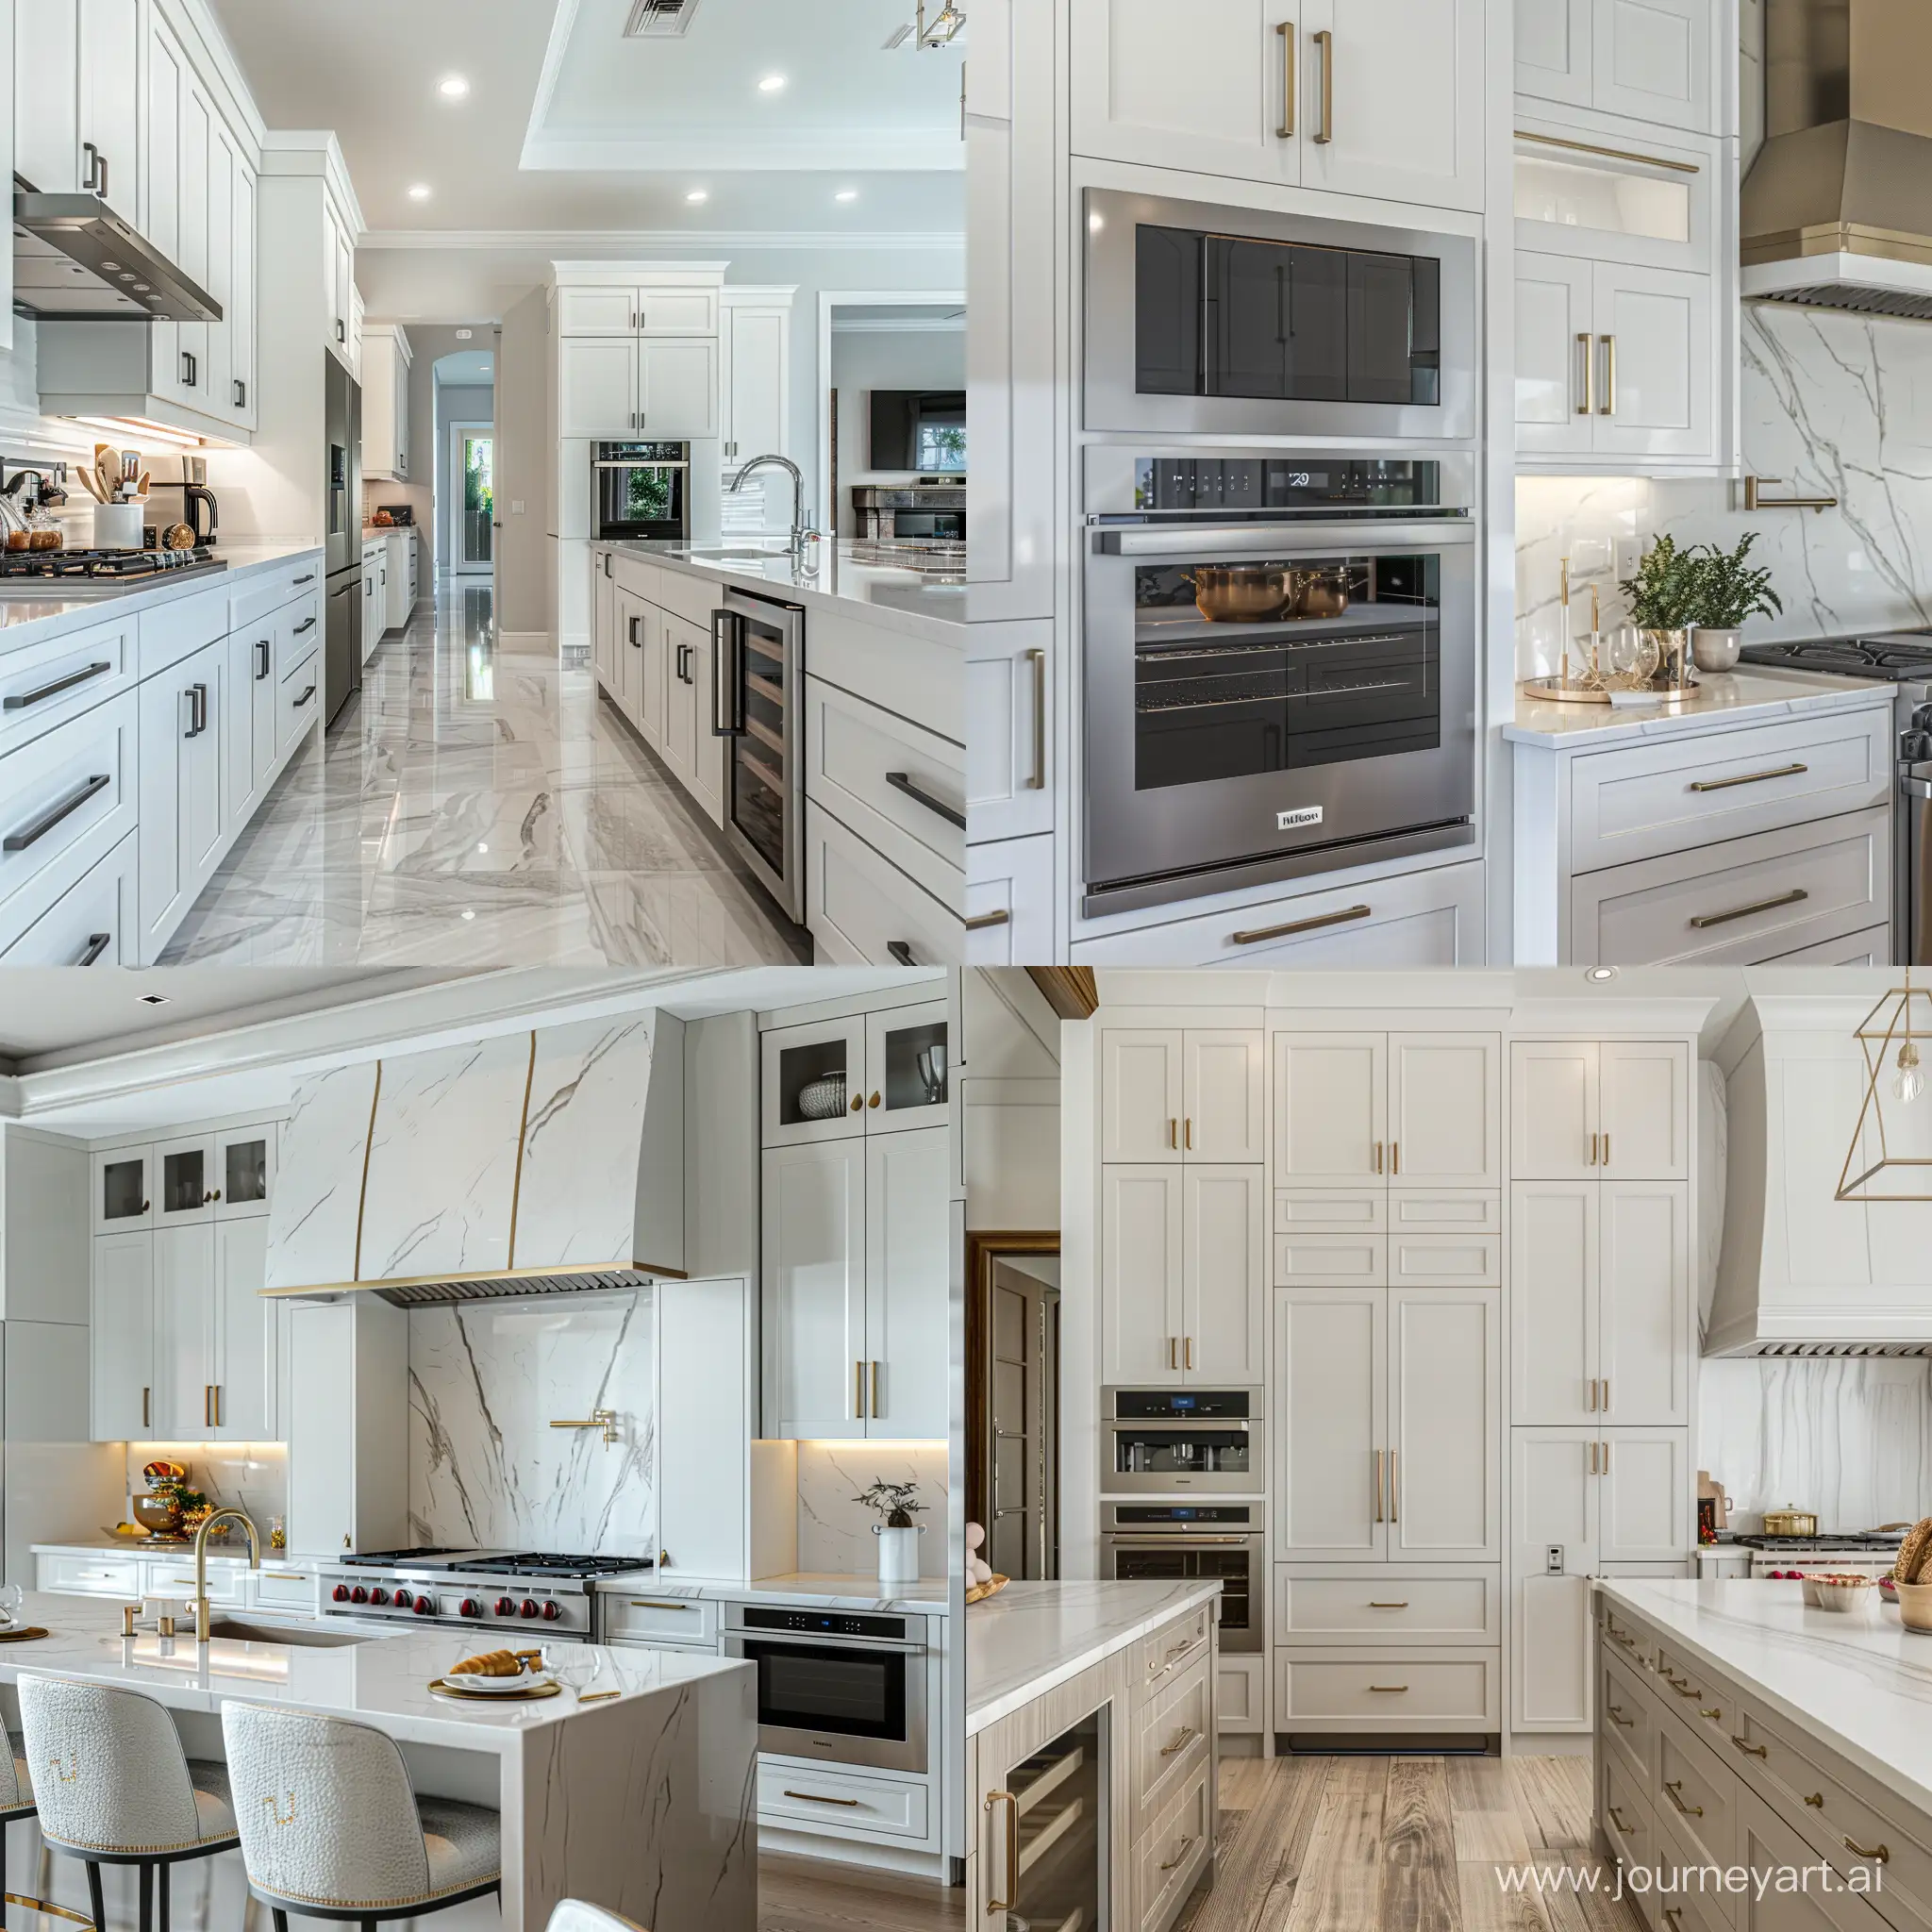 HighQuality-Realistic-White-Shaker-Style-Kitchen-Cabinets-in-Florida